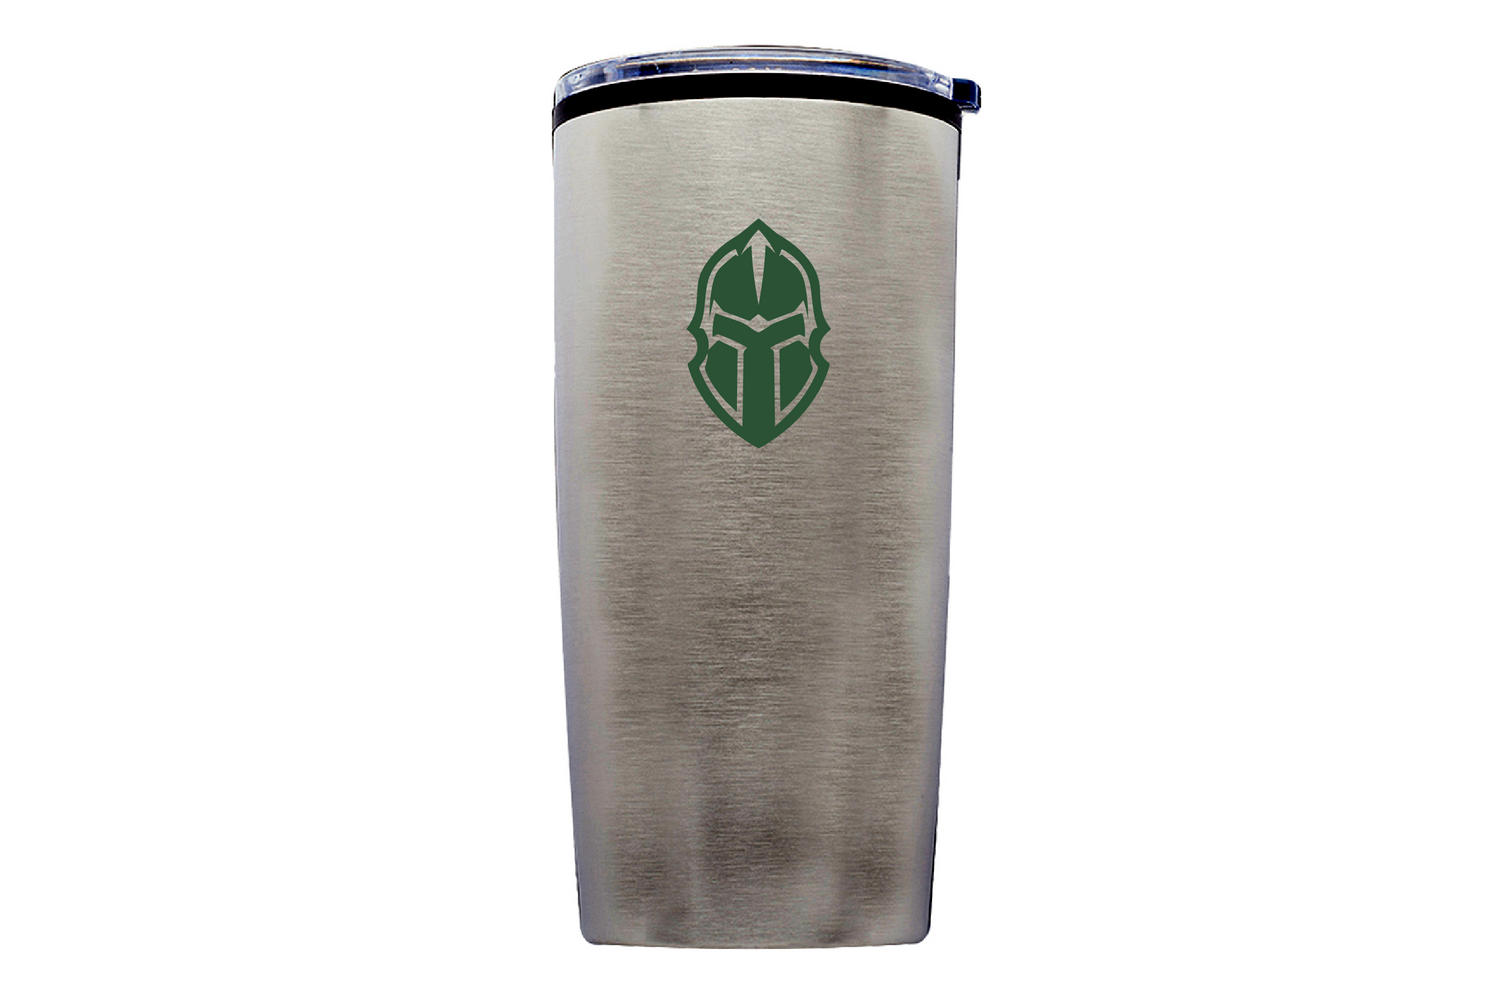 Customized insulated coffee tumbler in silver